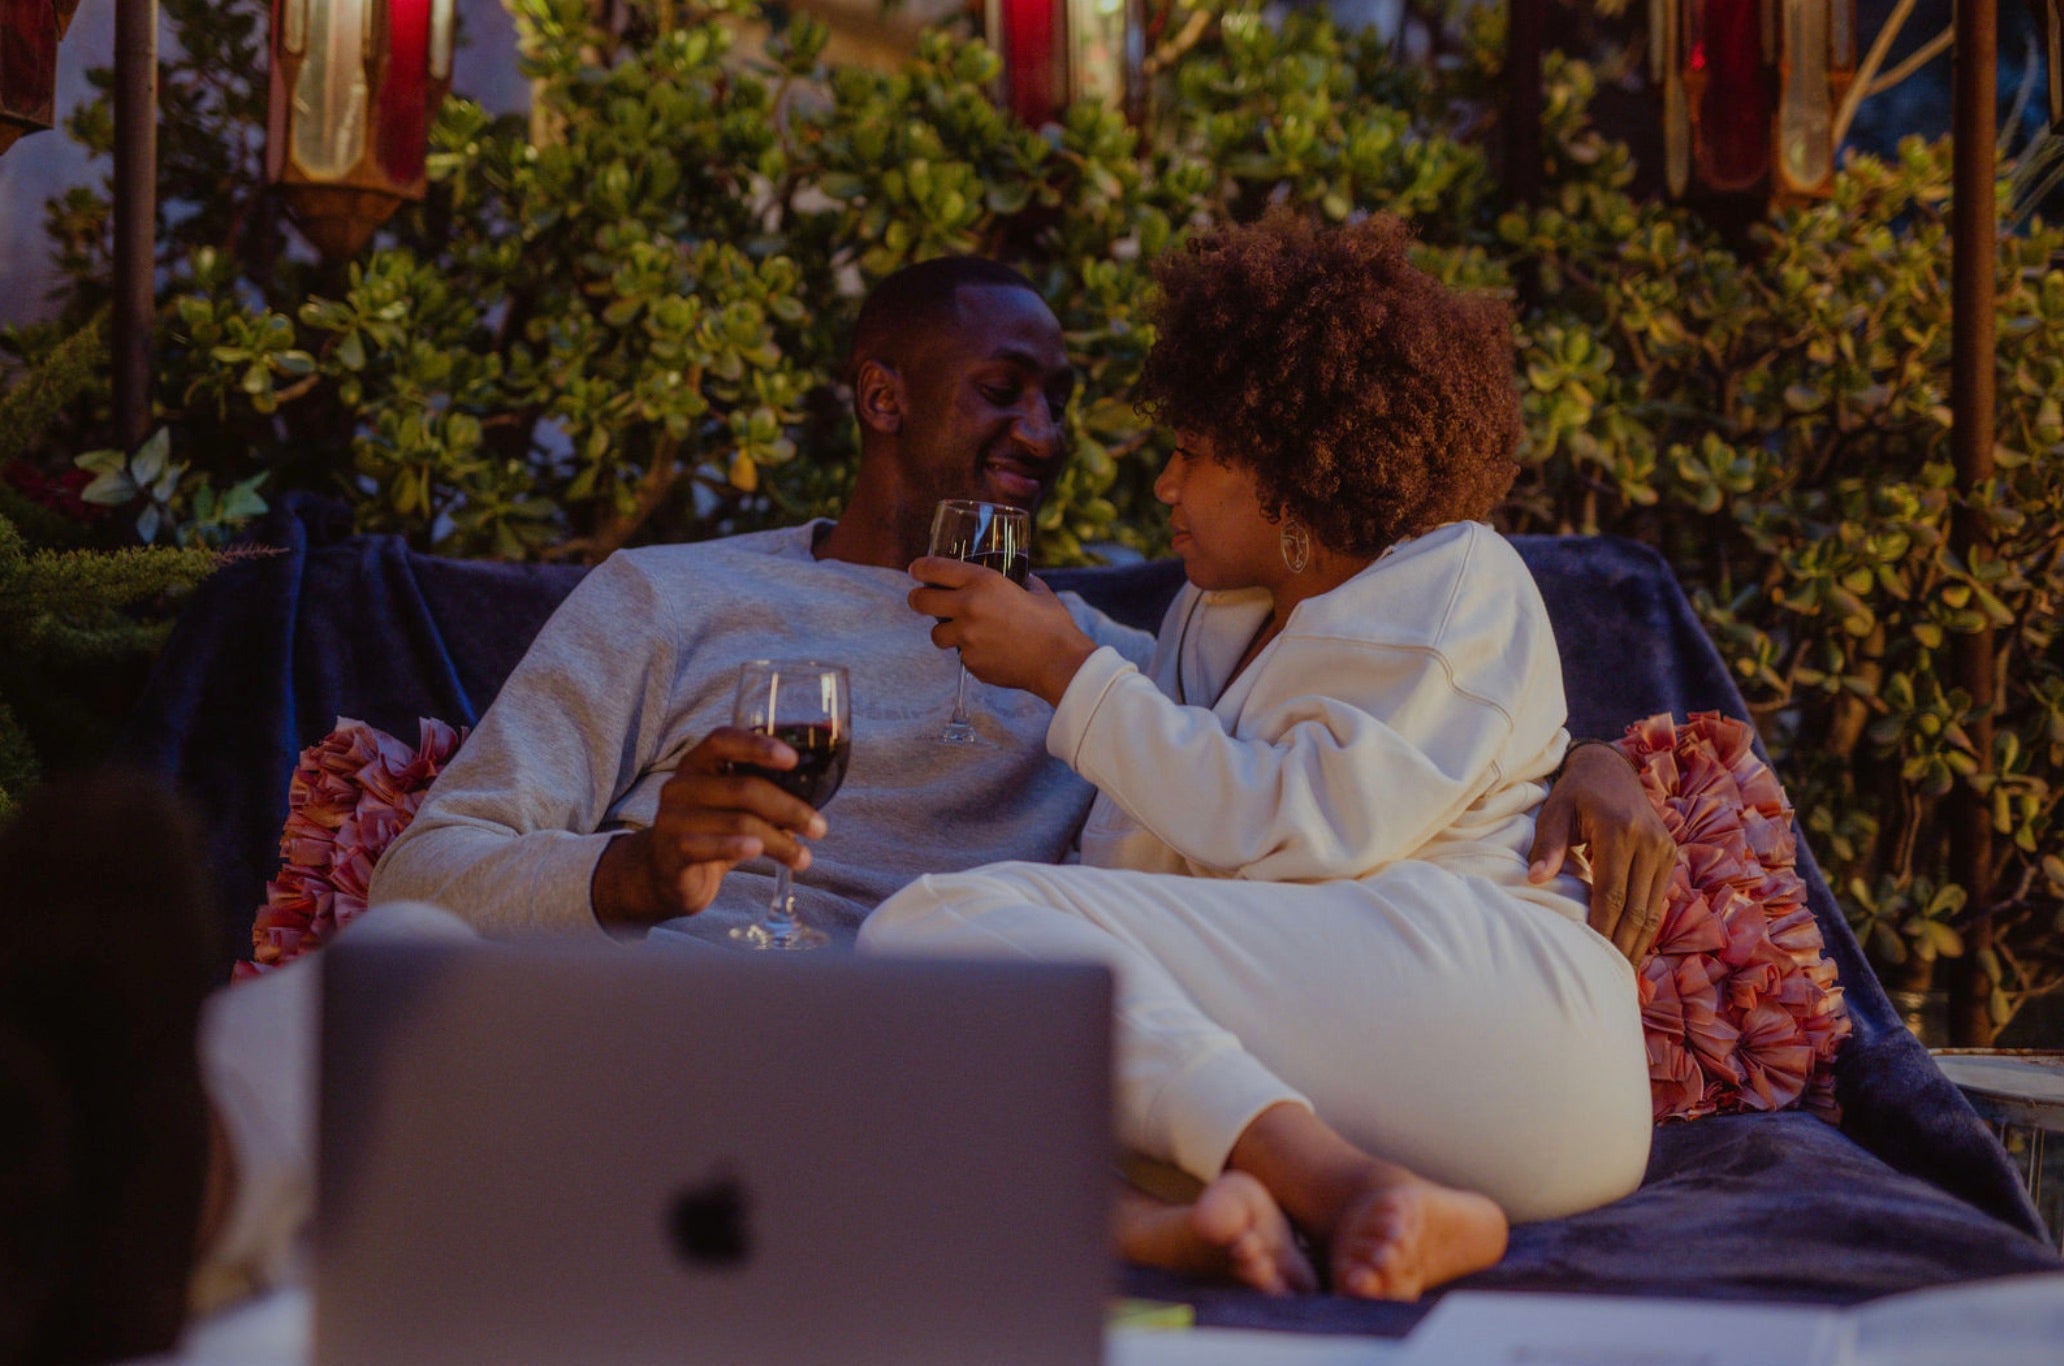 Couple smile at each other as they snuggle and enjoy a glass of wine together